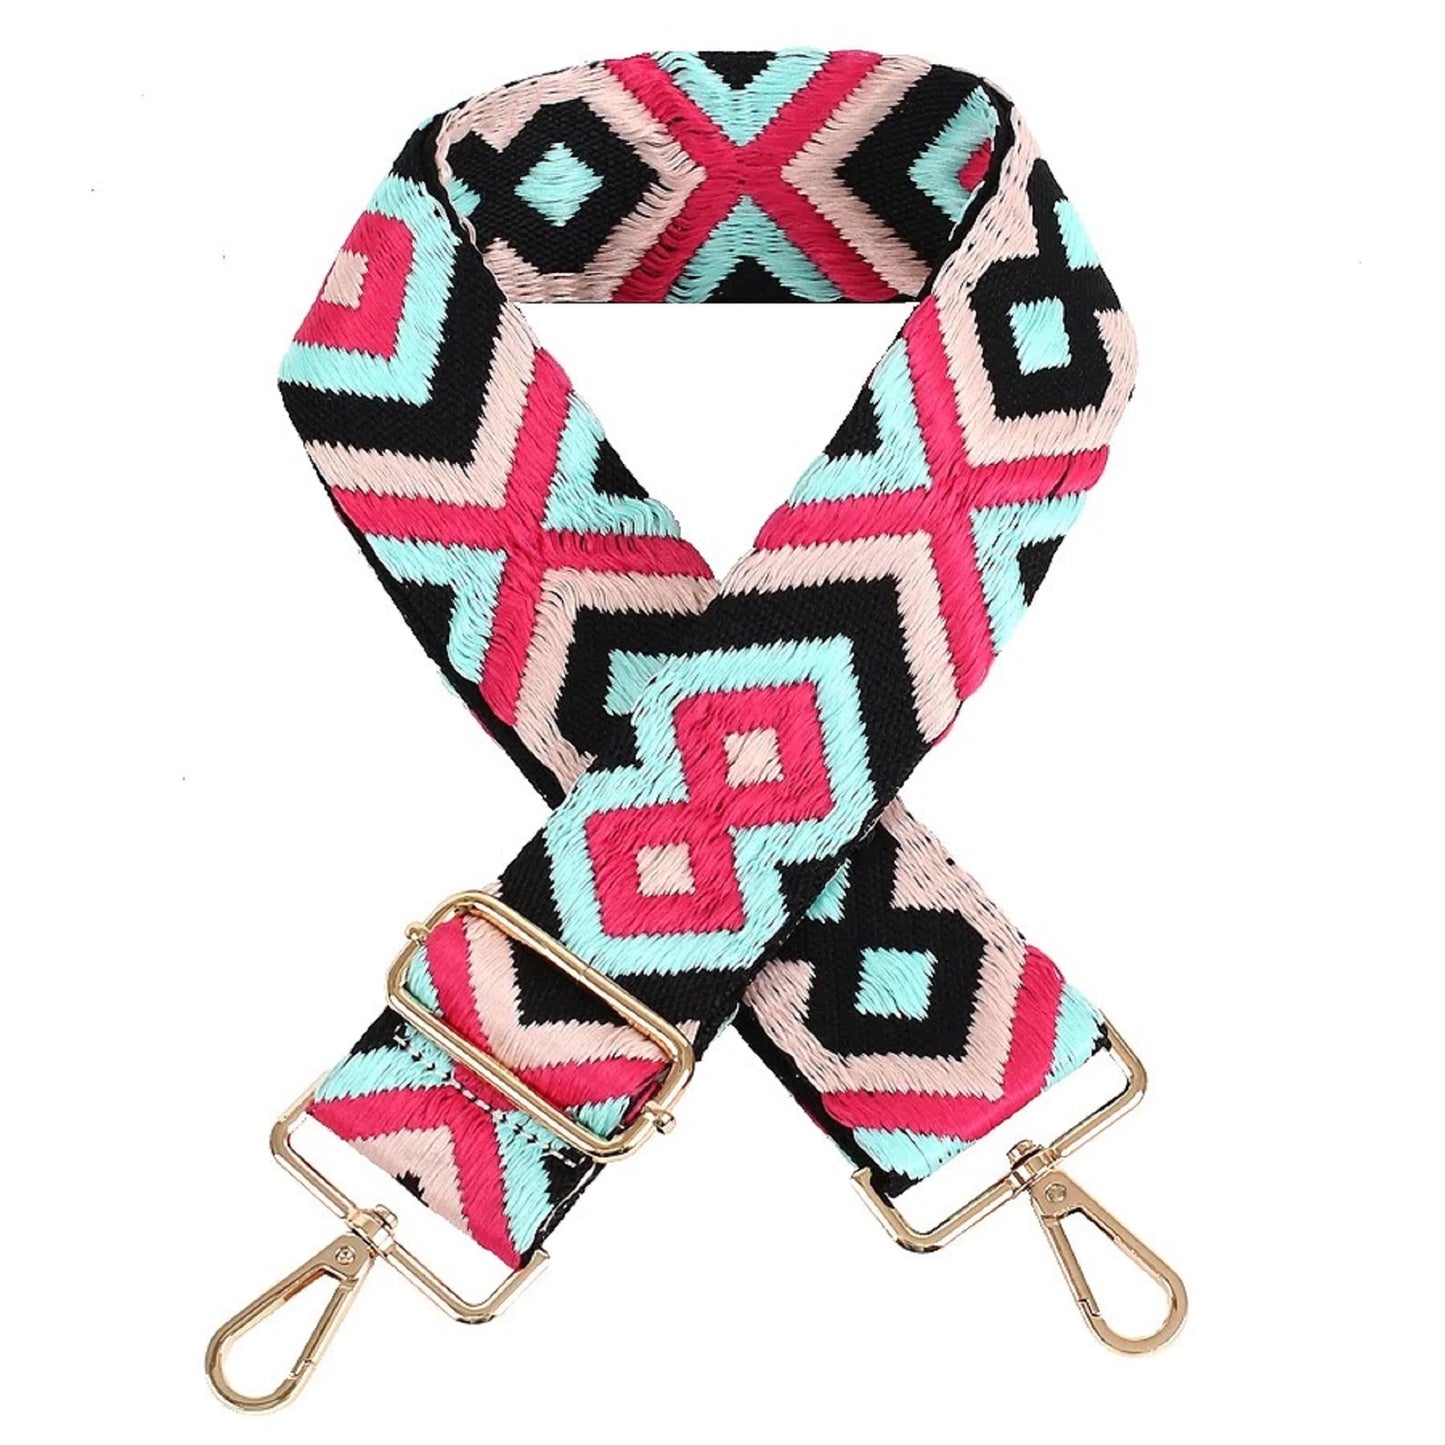 Replacement Straps for Wanderlust Crossbody Bag - Pink Aztec